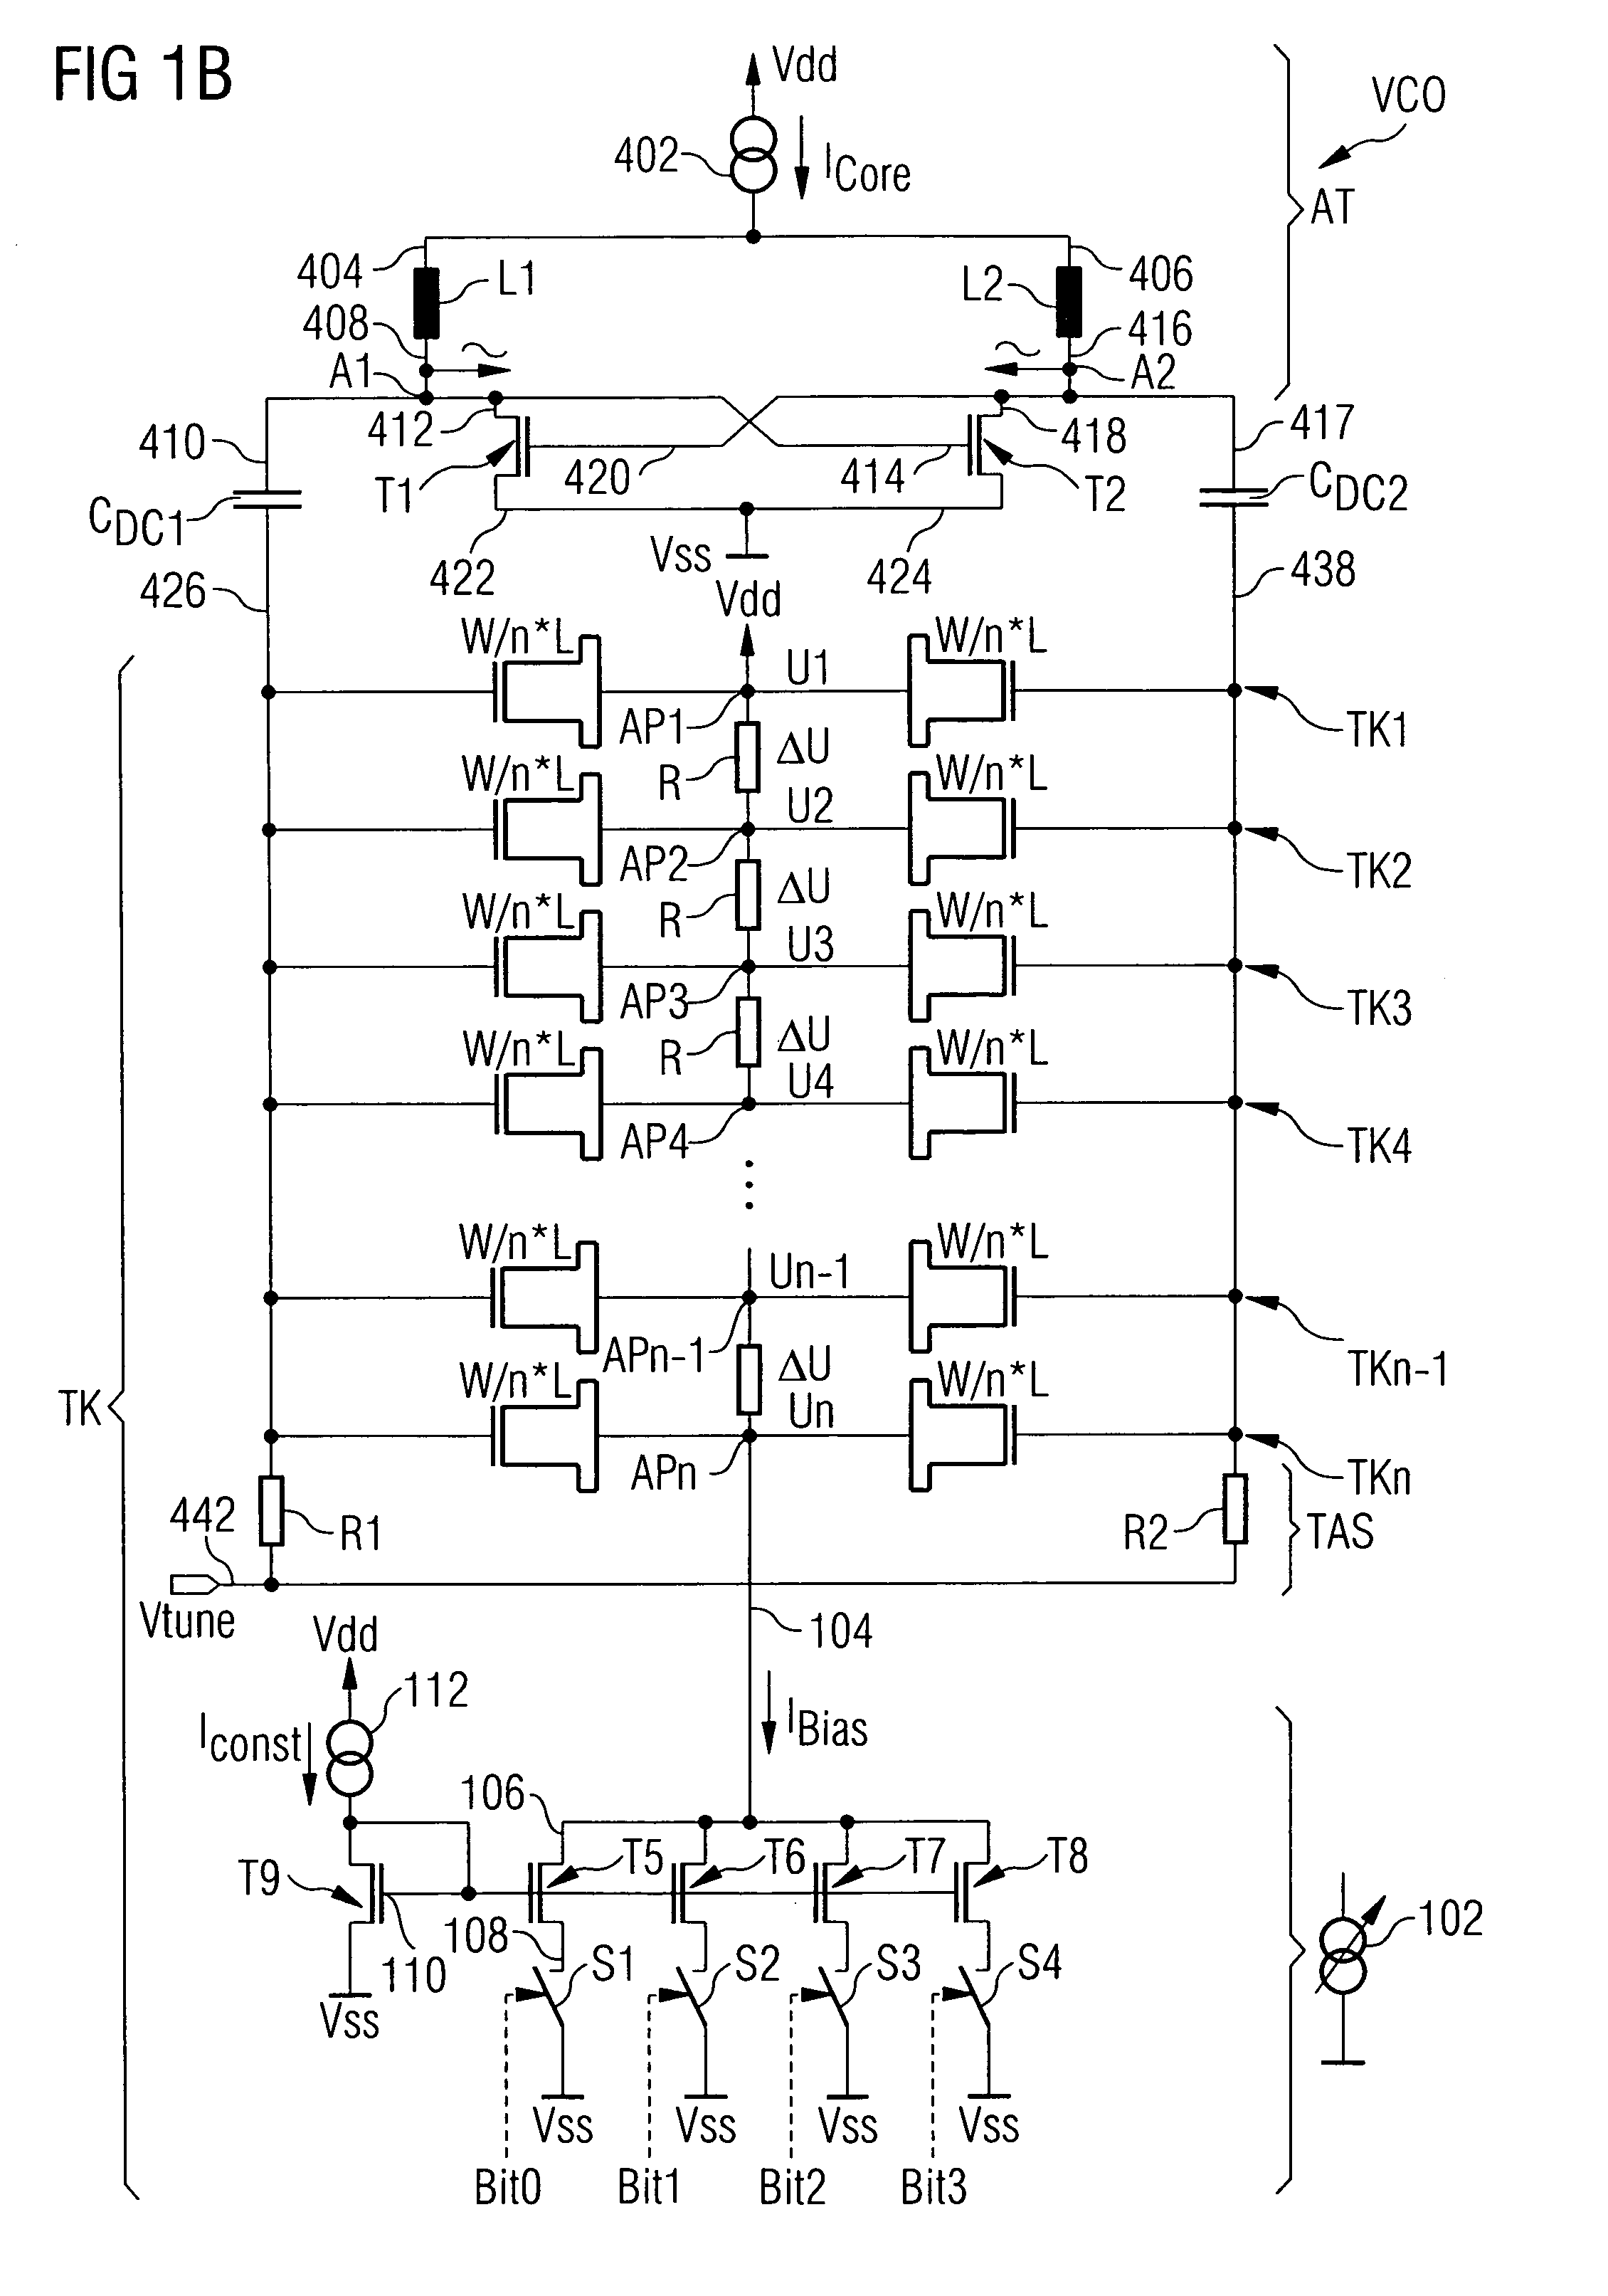 Circuit with variable capacitance and method for operating a circuit with variable capacitance